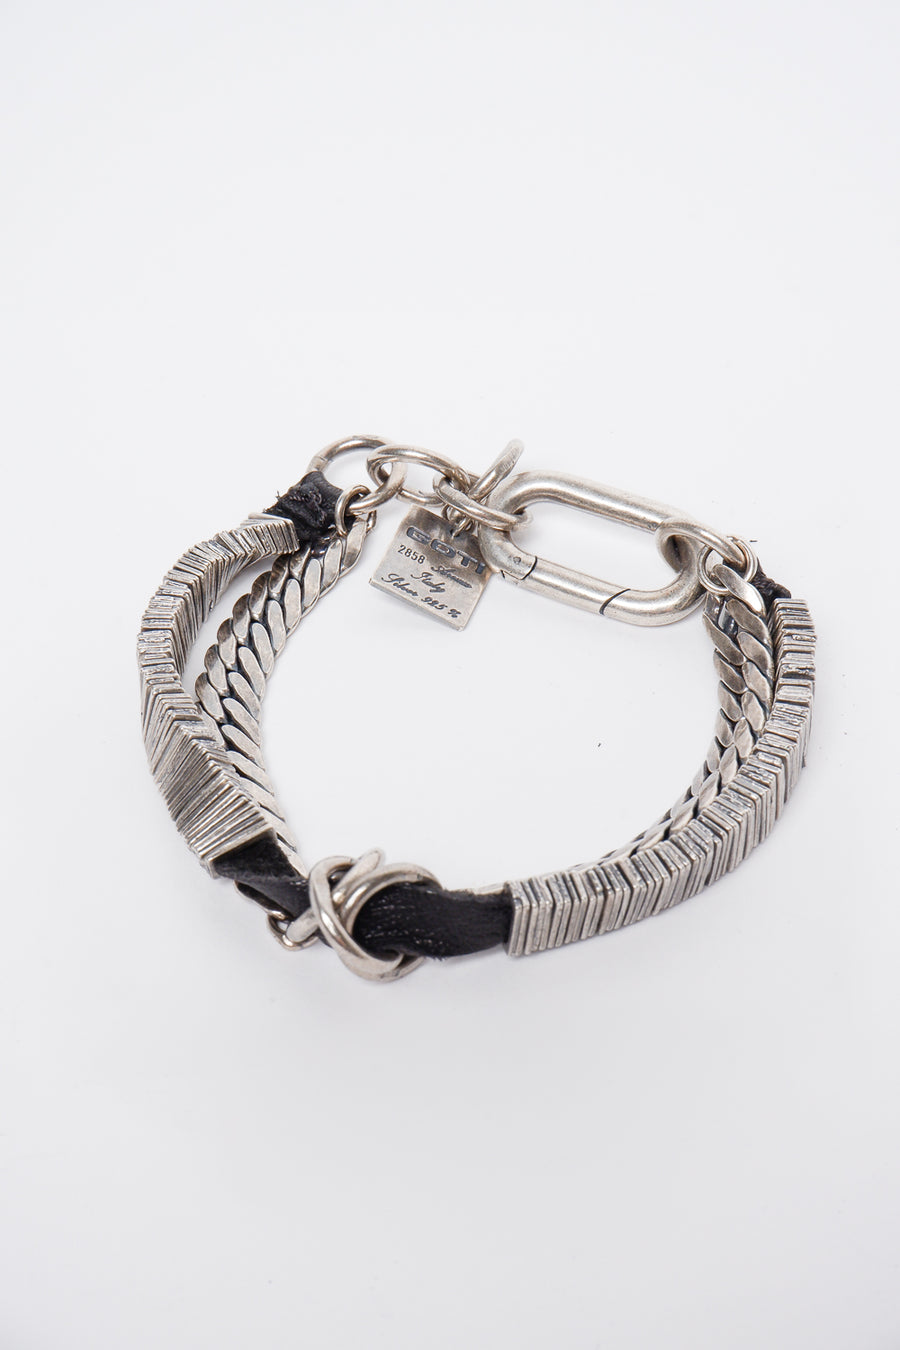 Buy the GOTI BR2227 Bracelet at Intro. Spend £50 for free UK delivery. Official stockists. We ship worldwide.